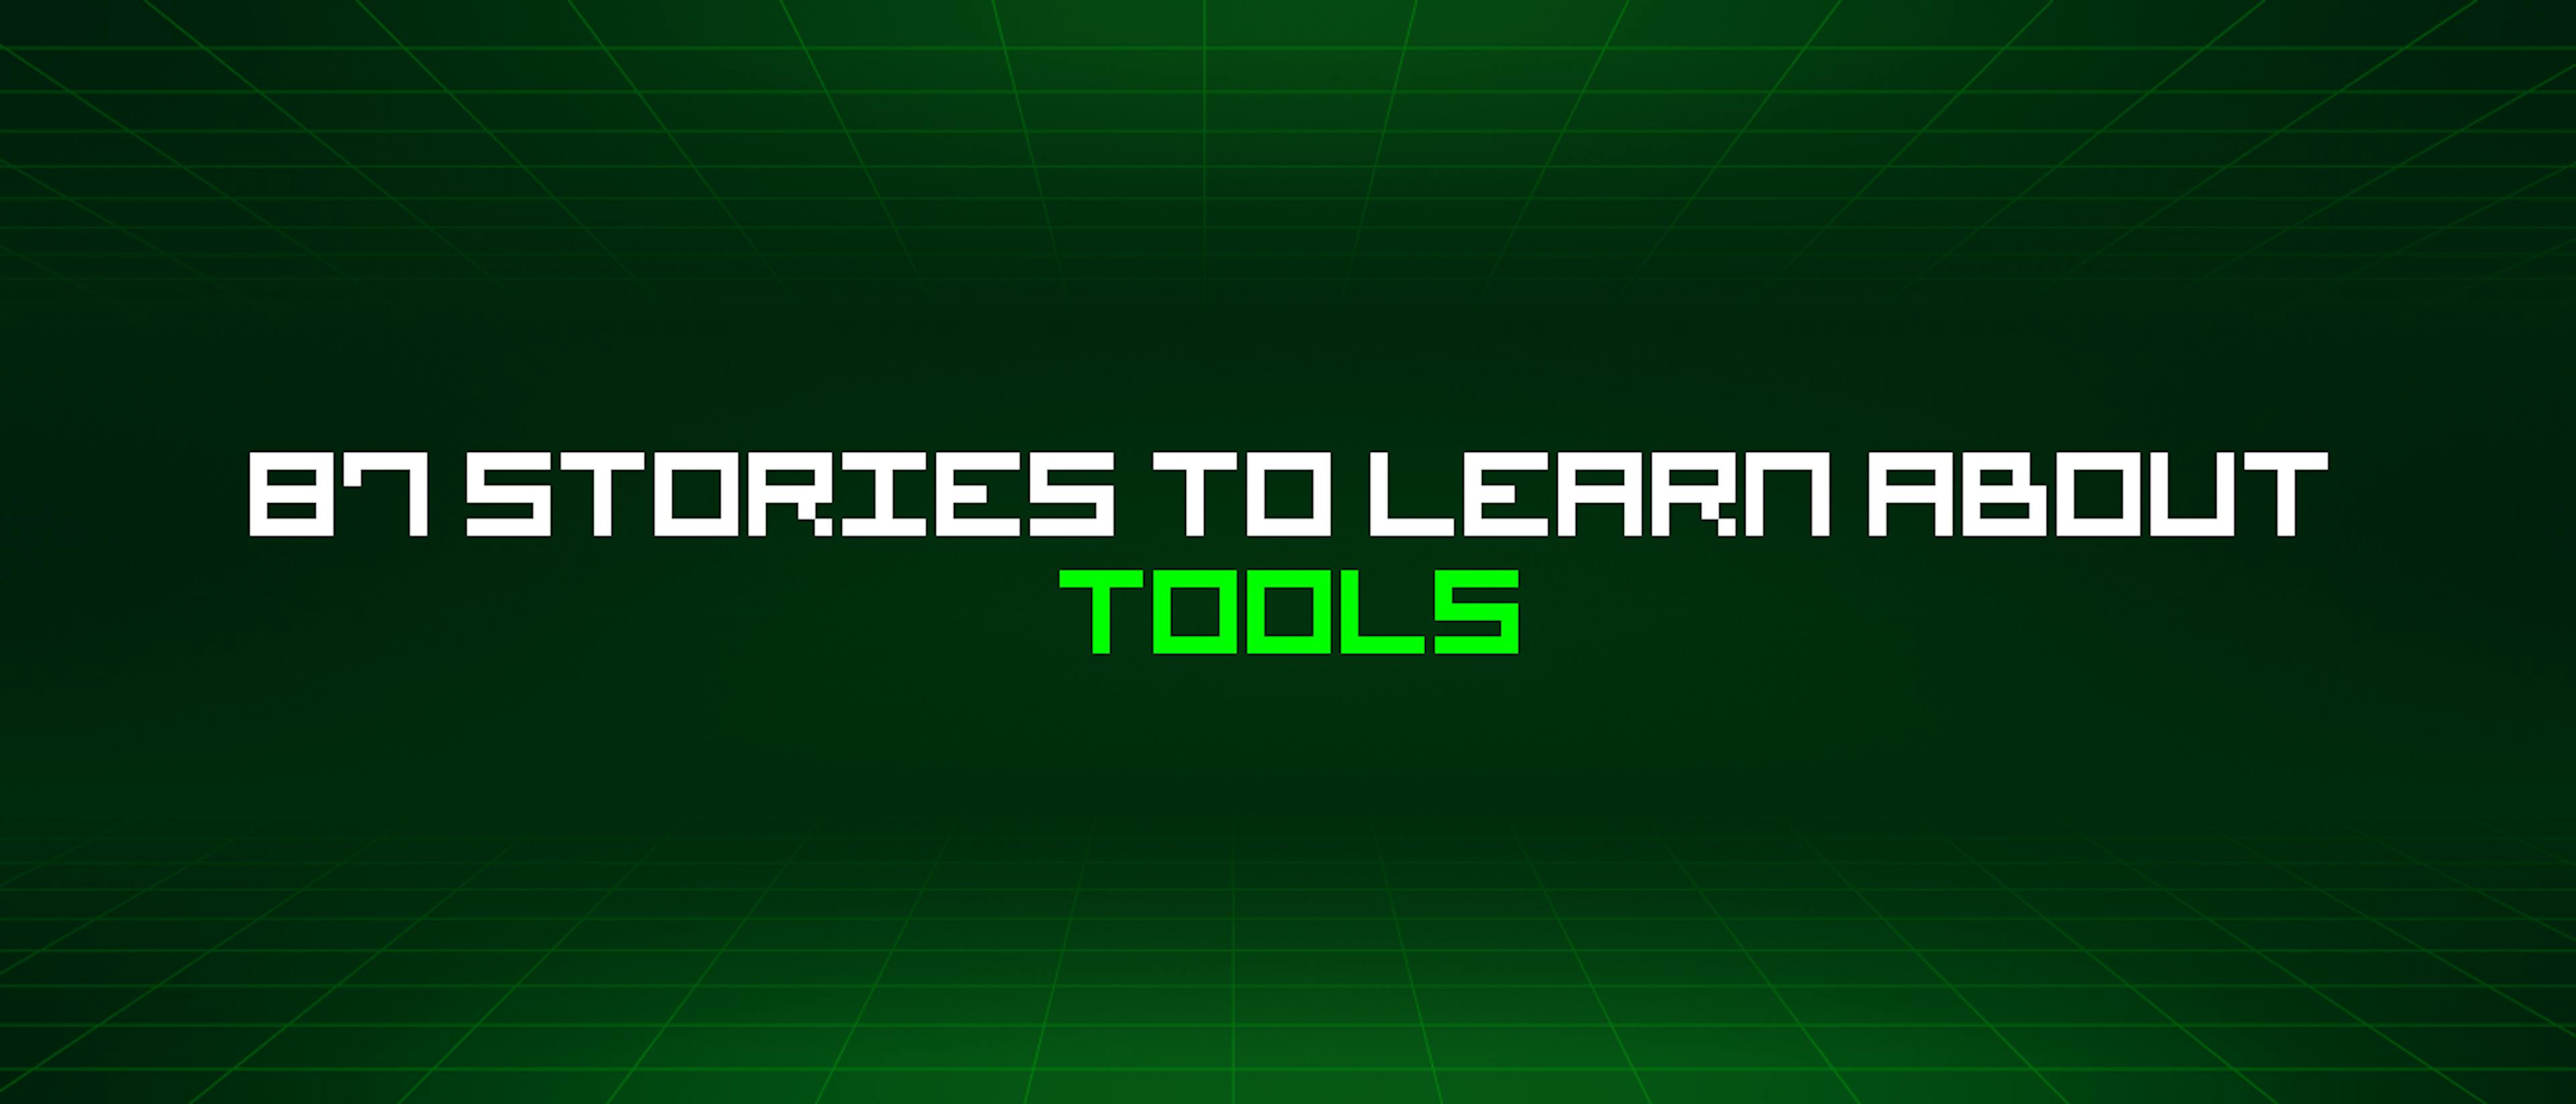 featured image - 87 Stories To Learn About Tools